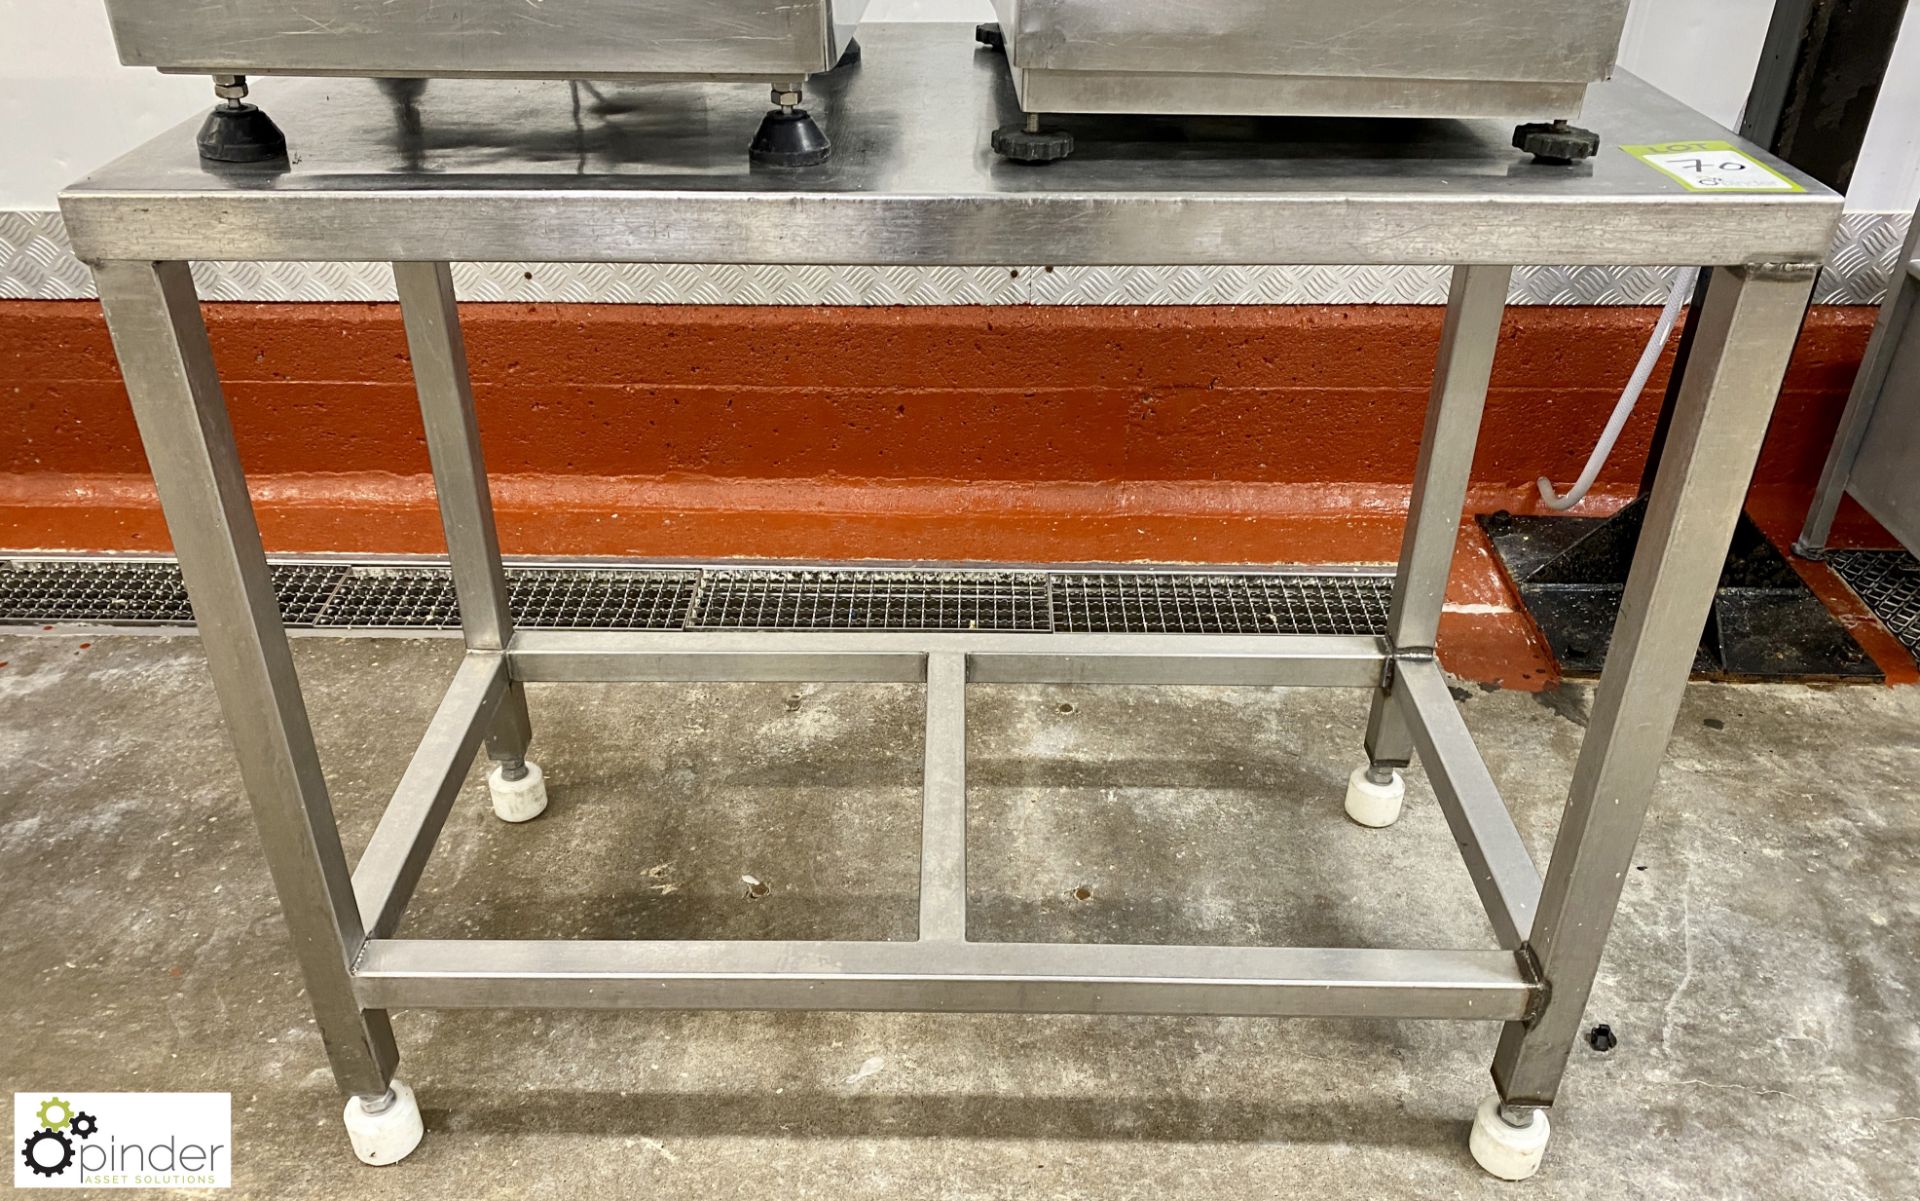 Stainless steel Preparation Table, 1000mm x 500mm x 830mm (Lift Out Fee: £10 plus VAT)